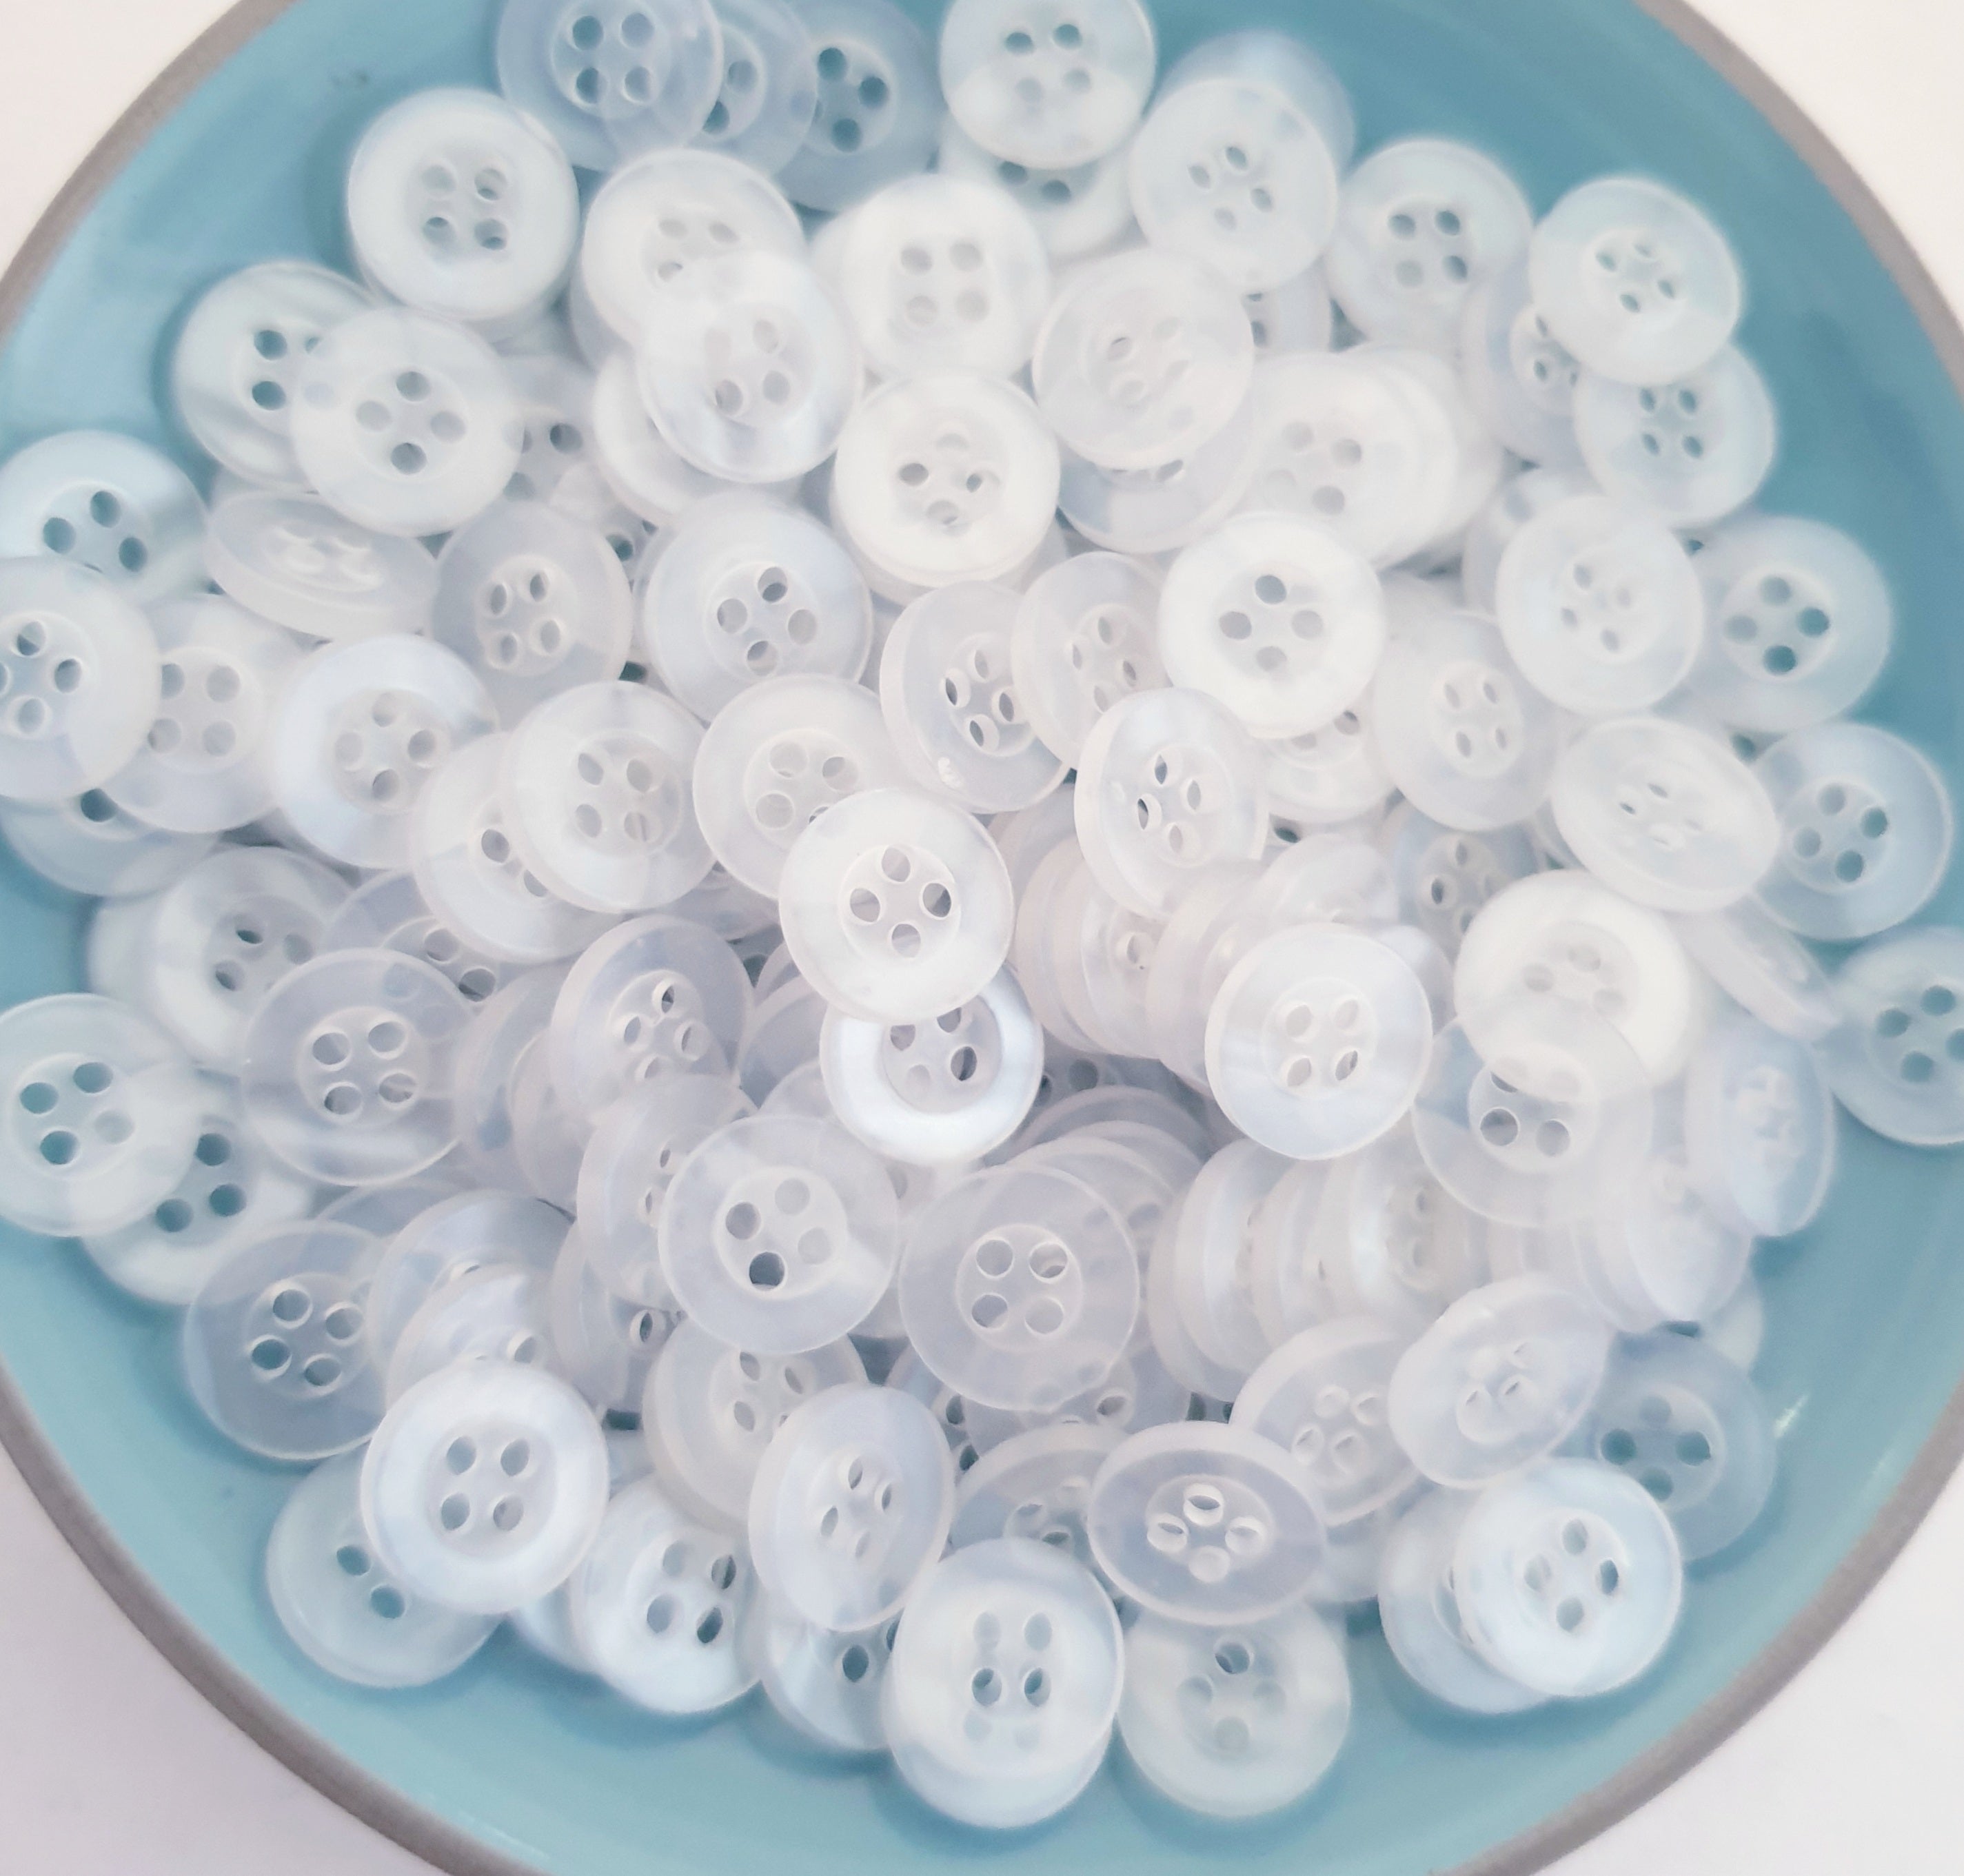 MajorCrafts 80pcs 10mm Clear White 4 Holes Small Round Resin Sewing Buttons